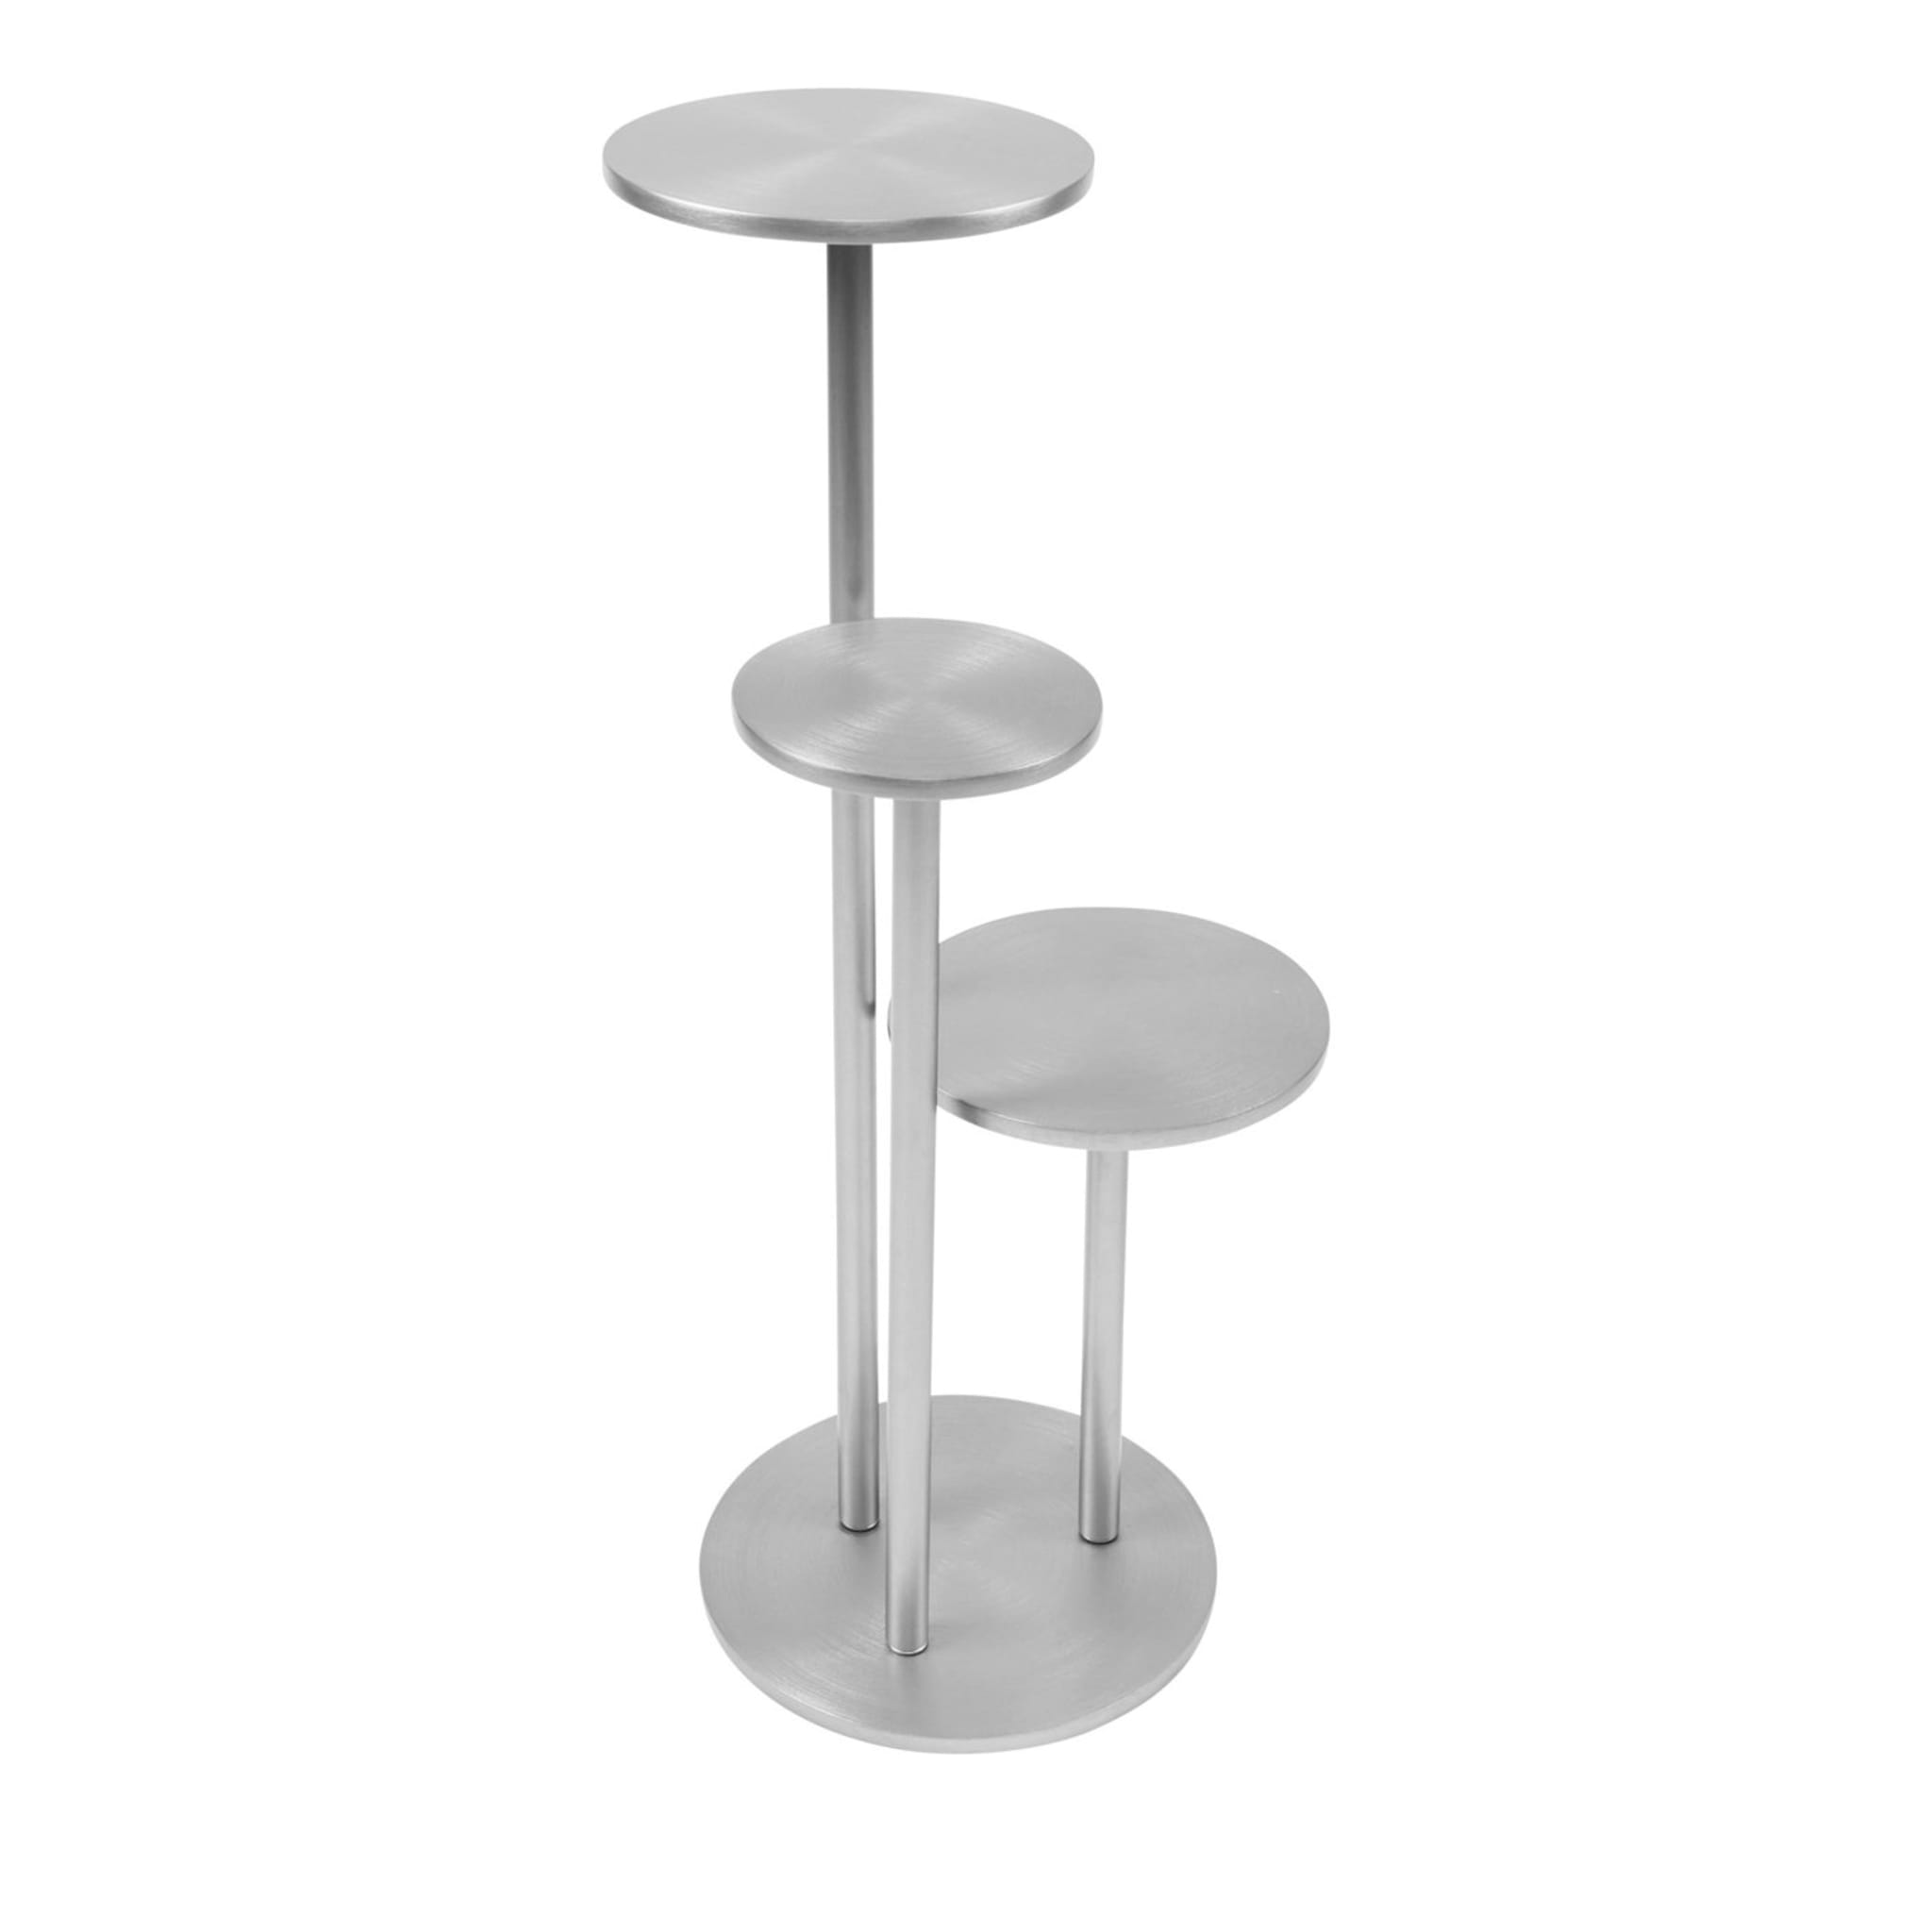 Orion Side Table in Aluminium - Main view